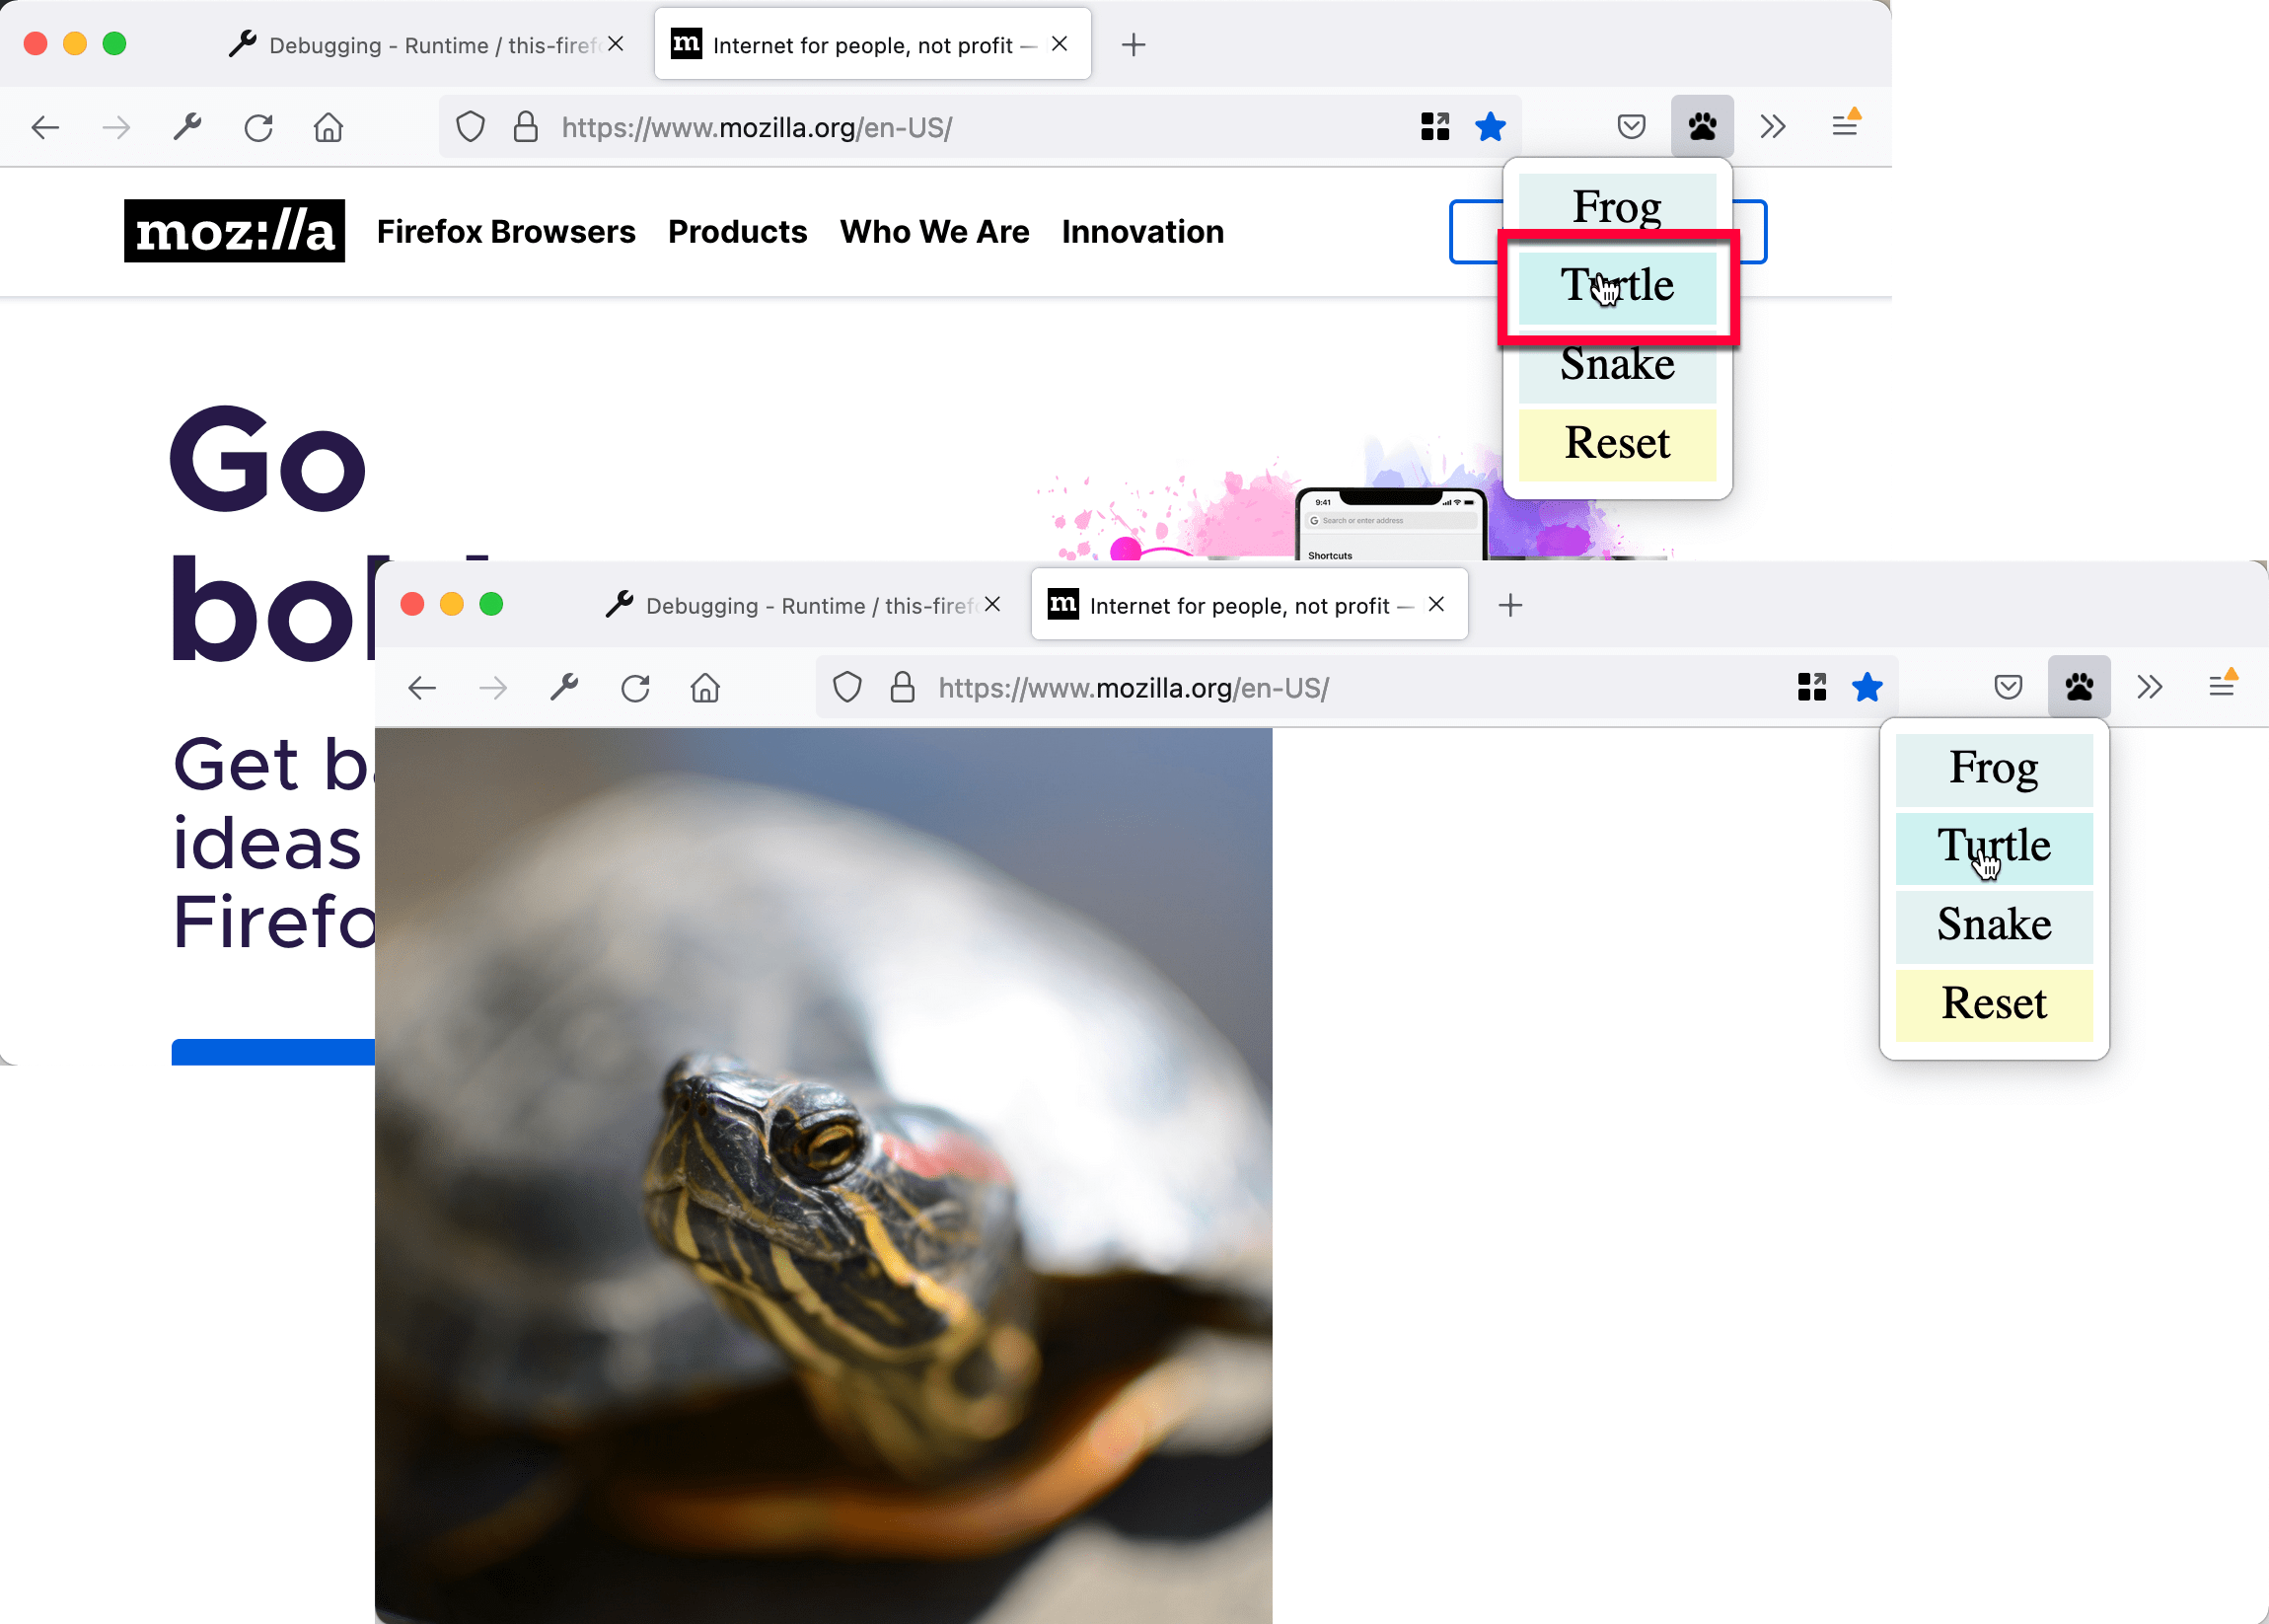 A page replaced with the image of a turtle